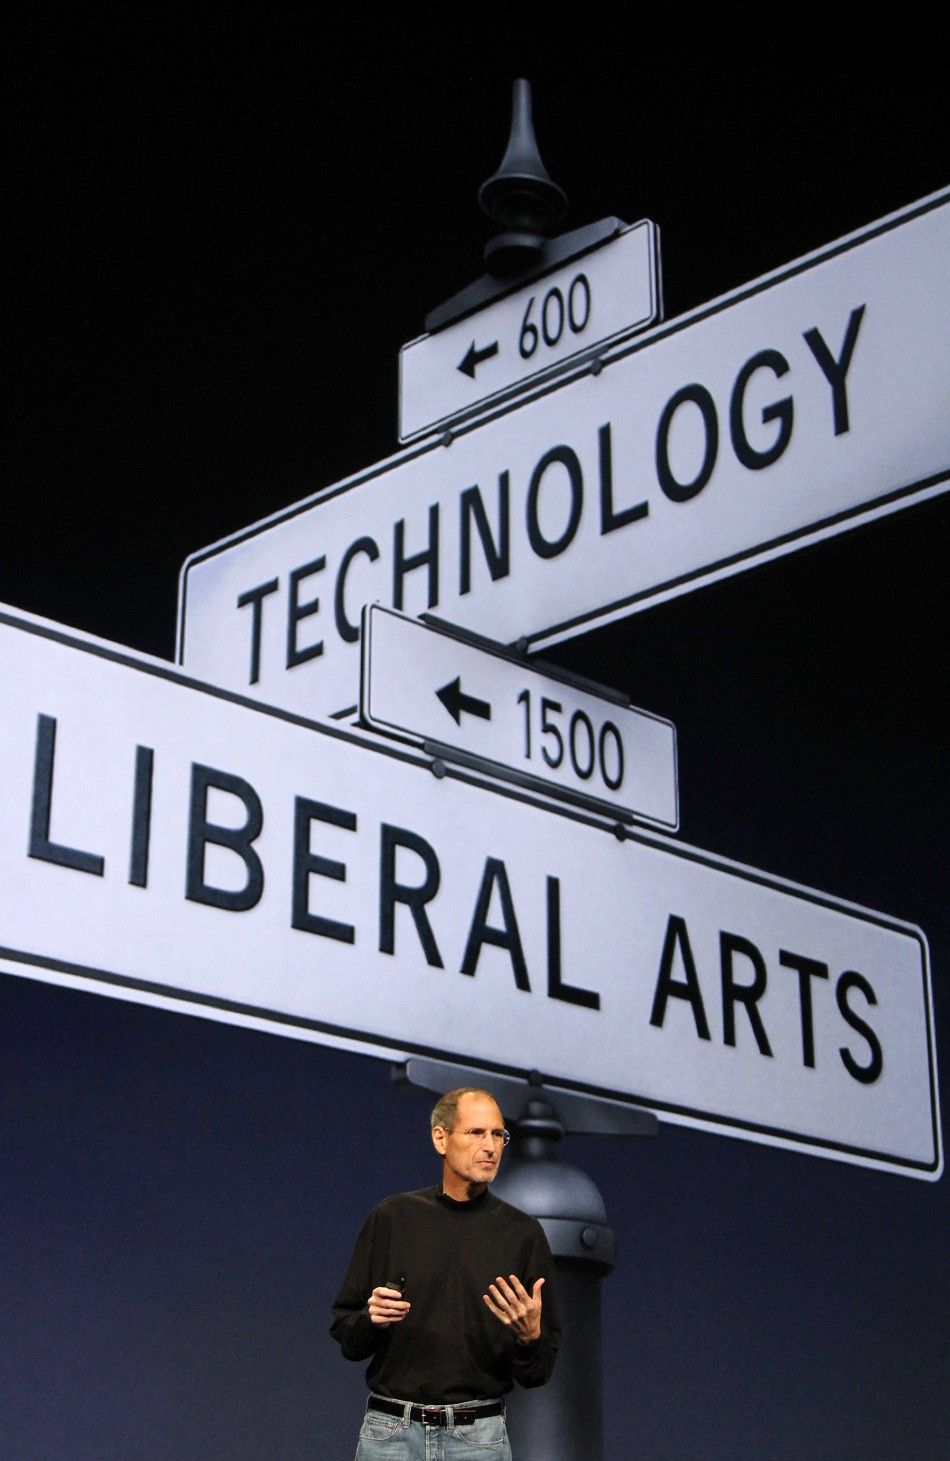 Apple Inc. CEO Steve Jobs speaks at the conclusion of the launch of the iPad 2 on stage during an Apple event in San Francisco, California 